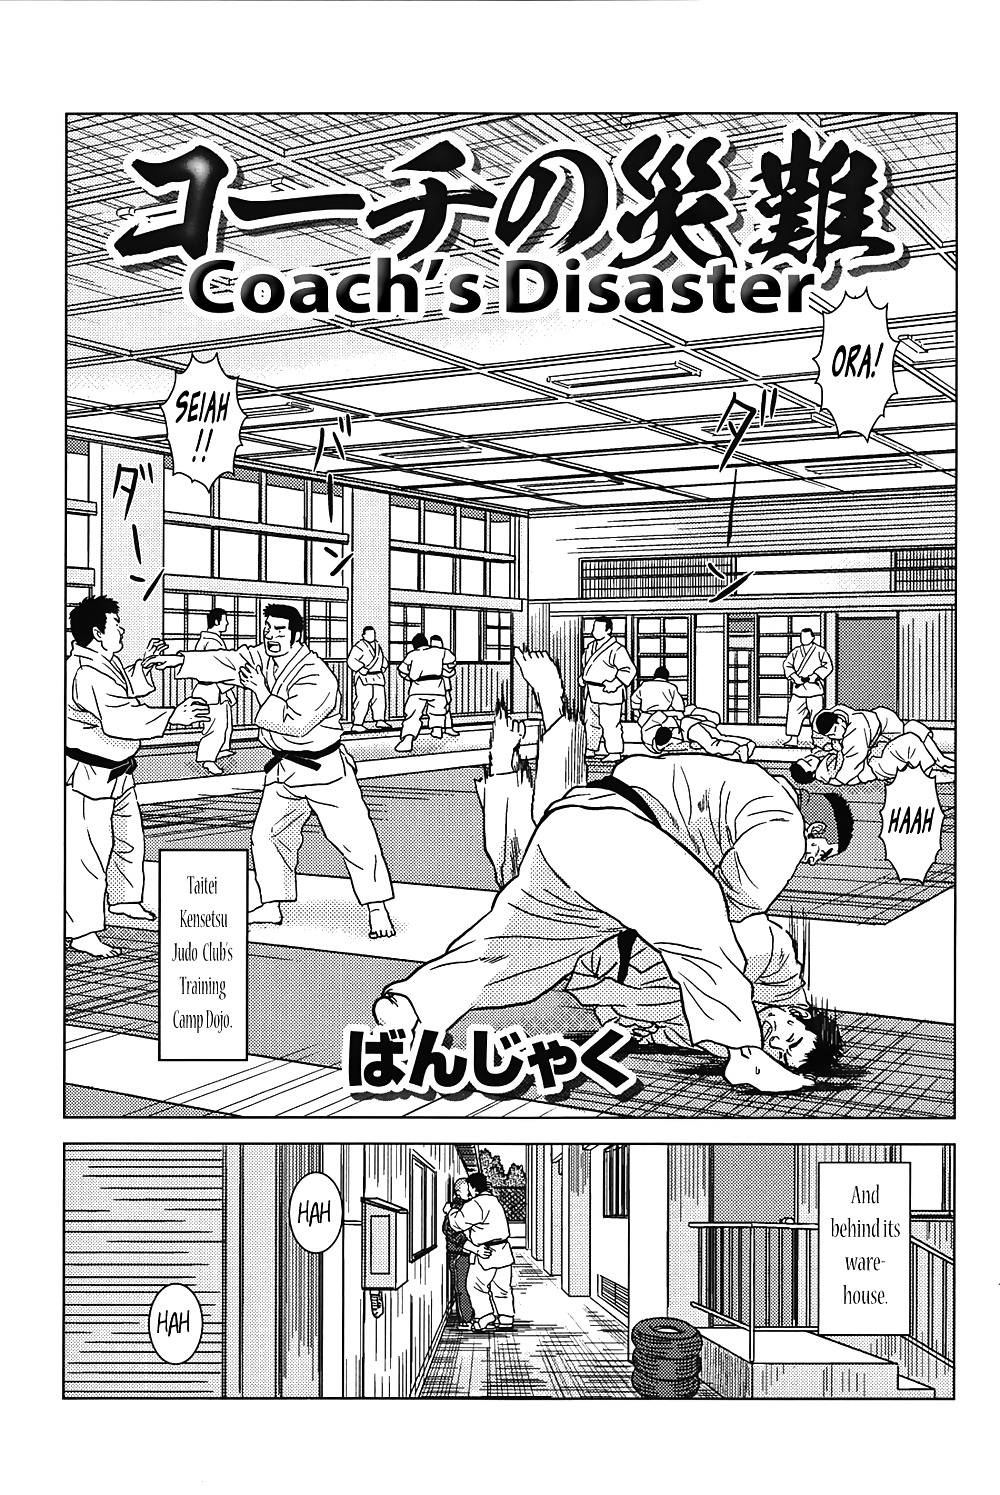 Coach's Disaster #31940722